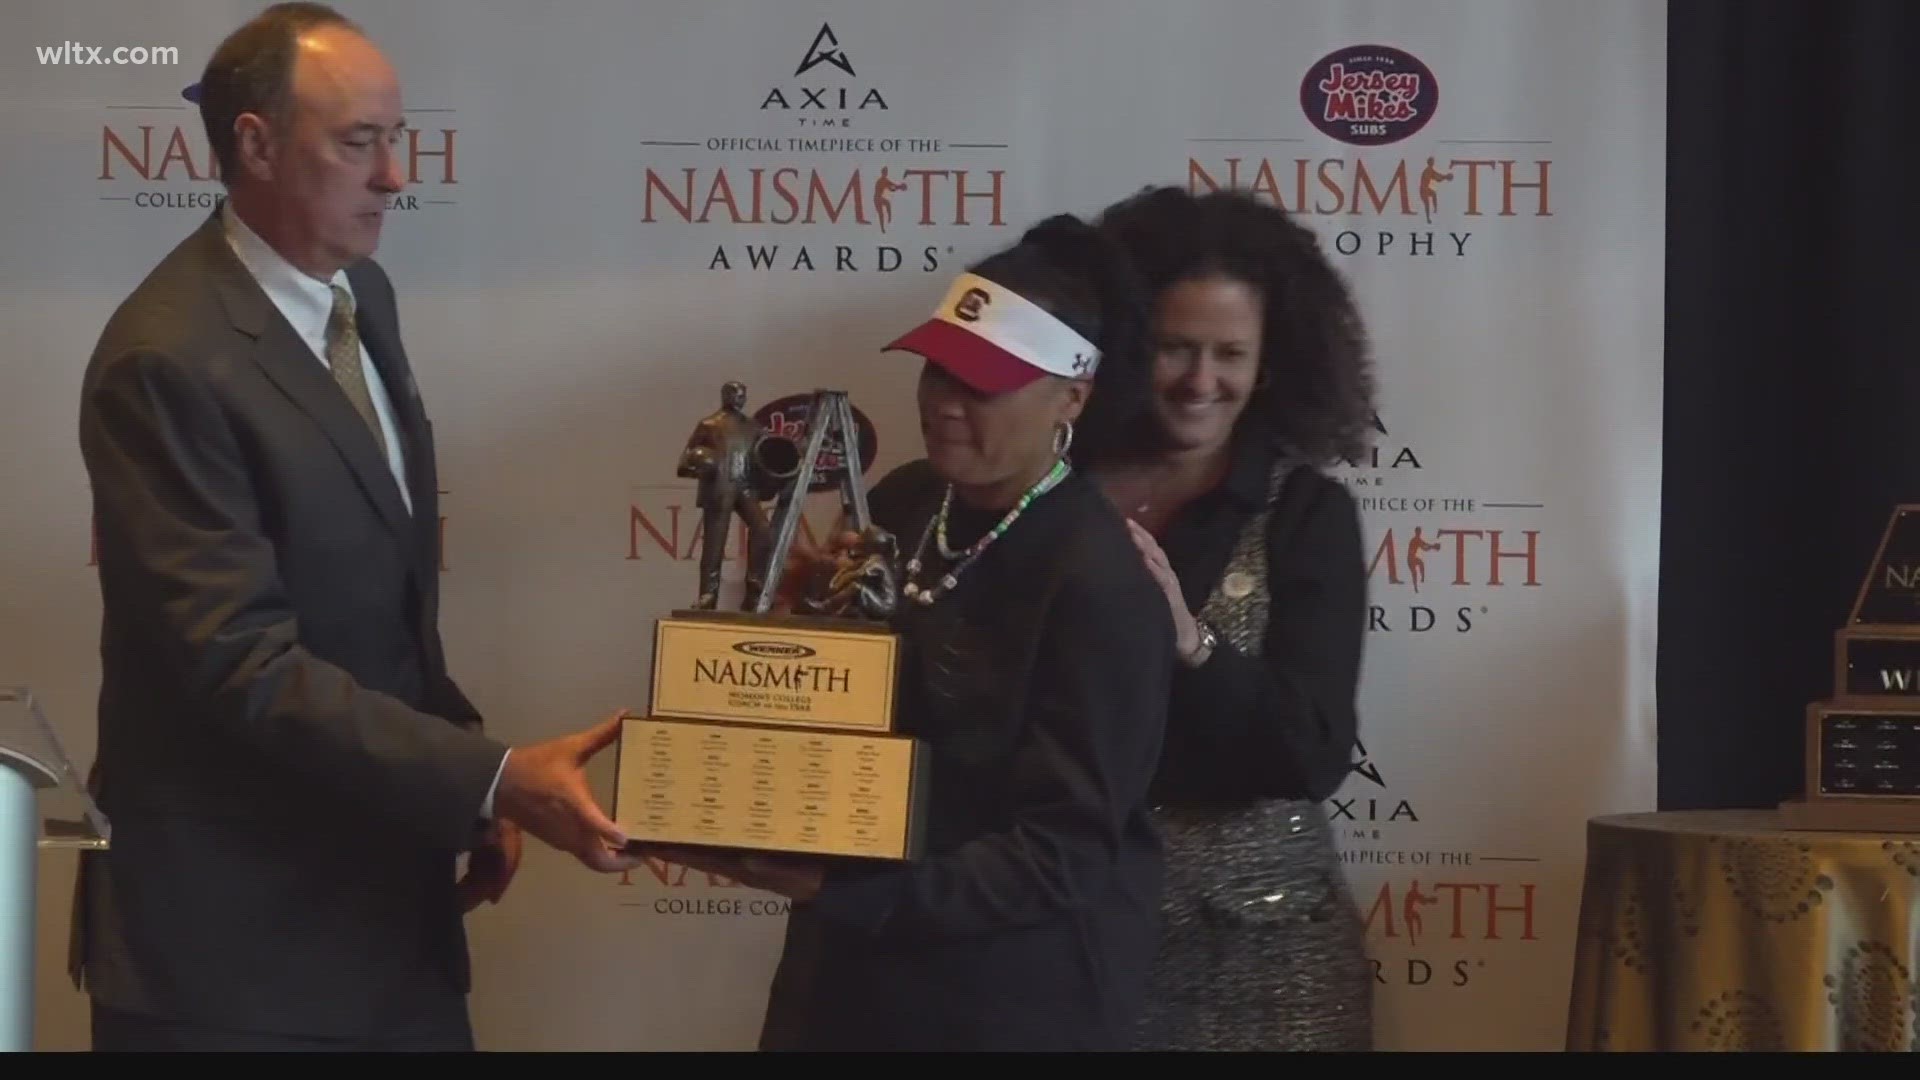 South Carolina head women's basketball coach Dawn Staley took her place on the stage in Cleveland as she was named national coach of the year.